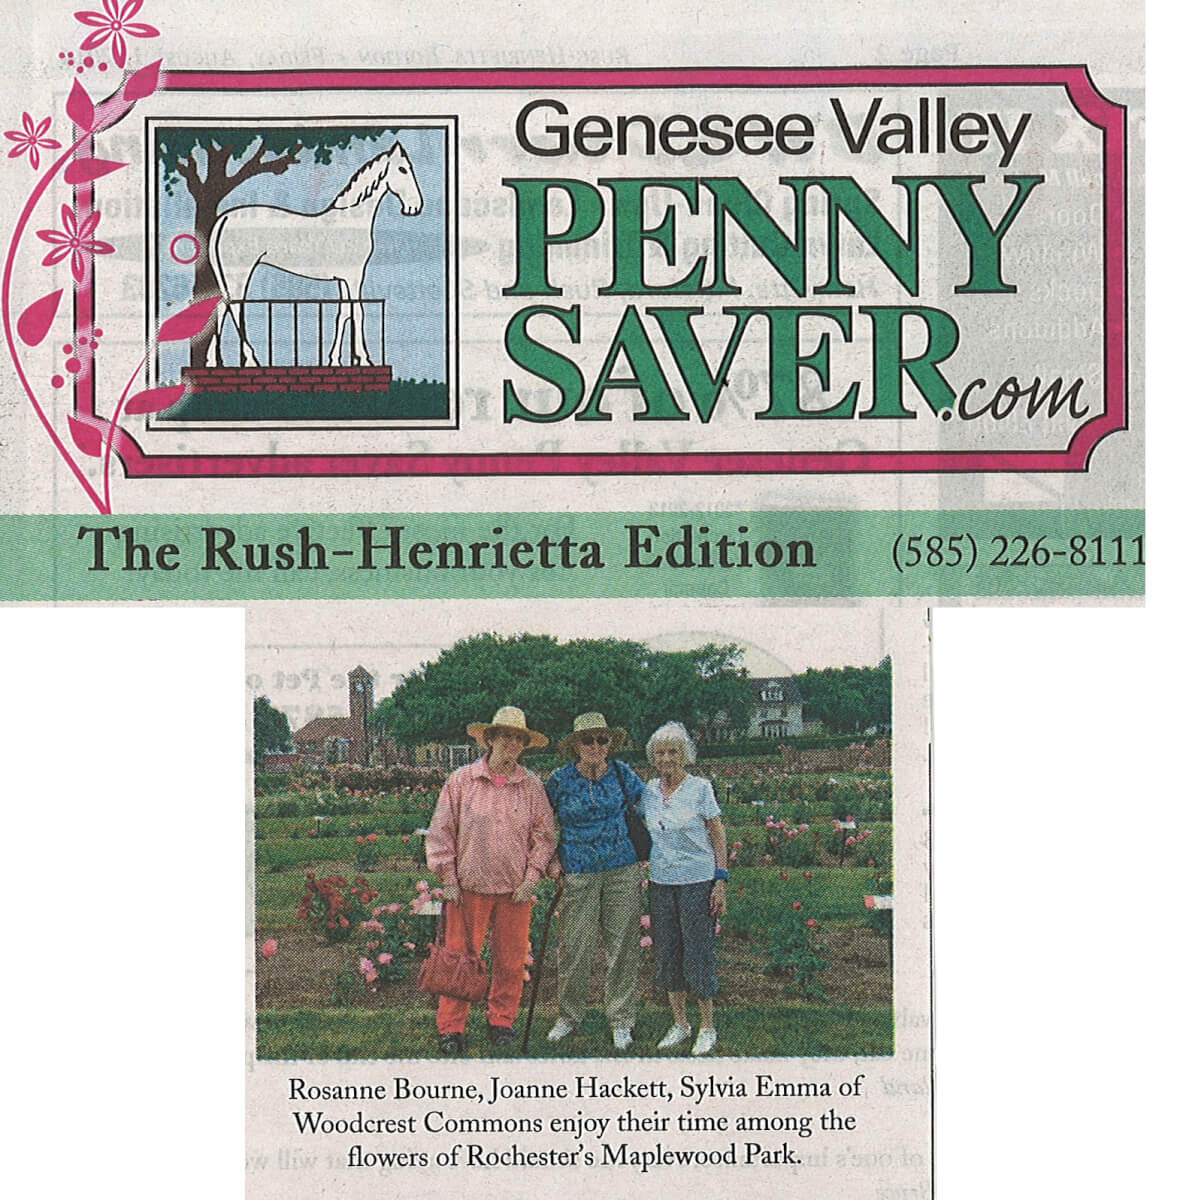 Woodcrest Commons visits the Maplewood Rose Garden photo in the Genesee Valley Penny Saver August 2014